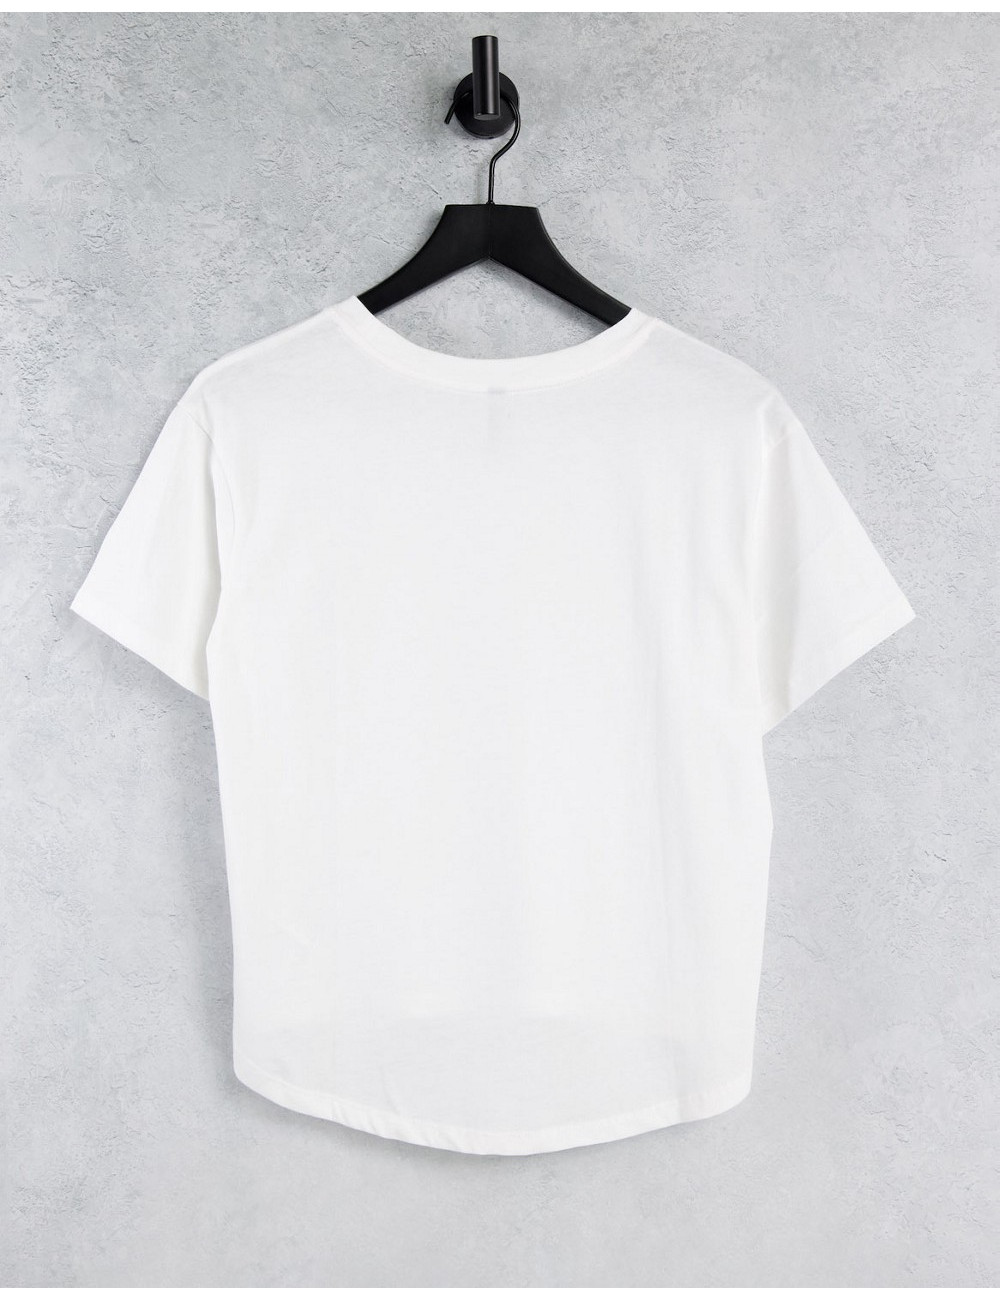 Pieces Tall crop t-shirt in...